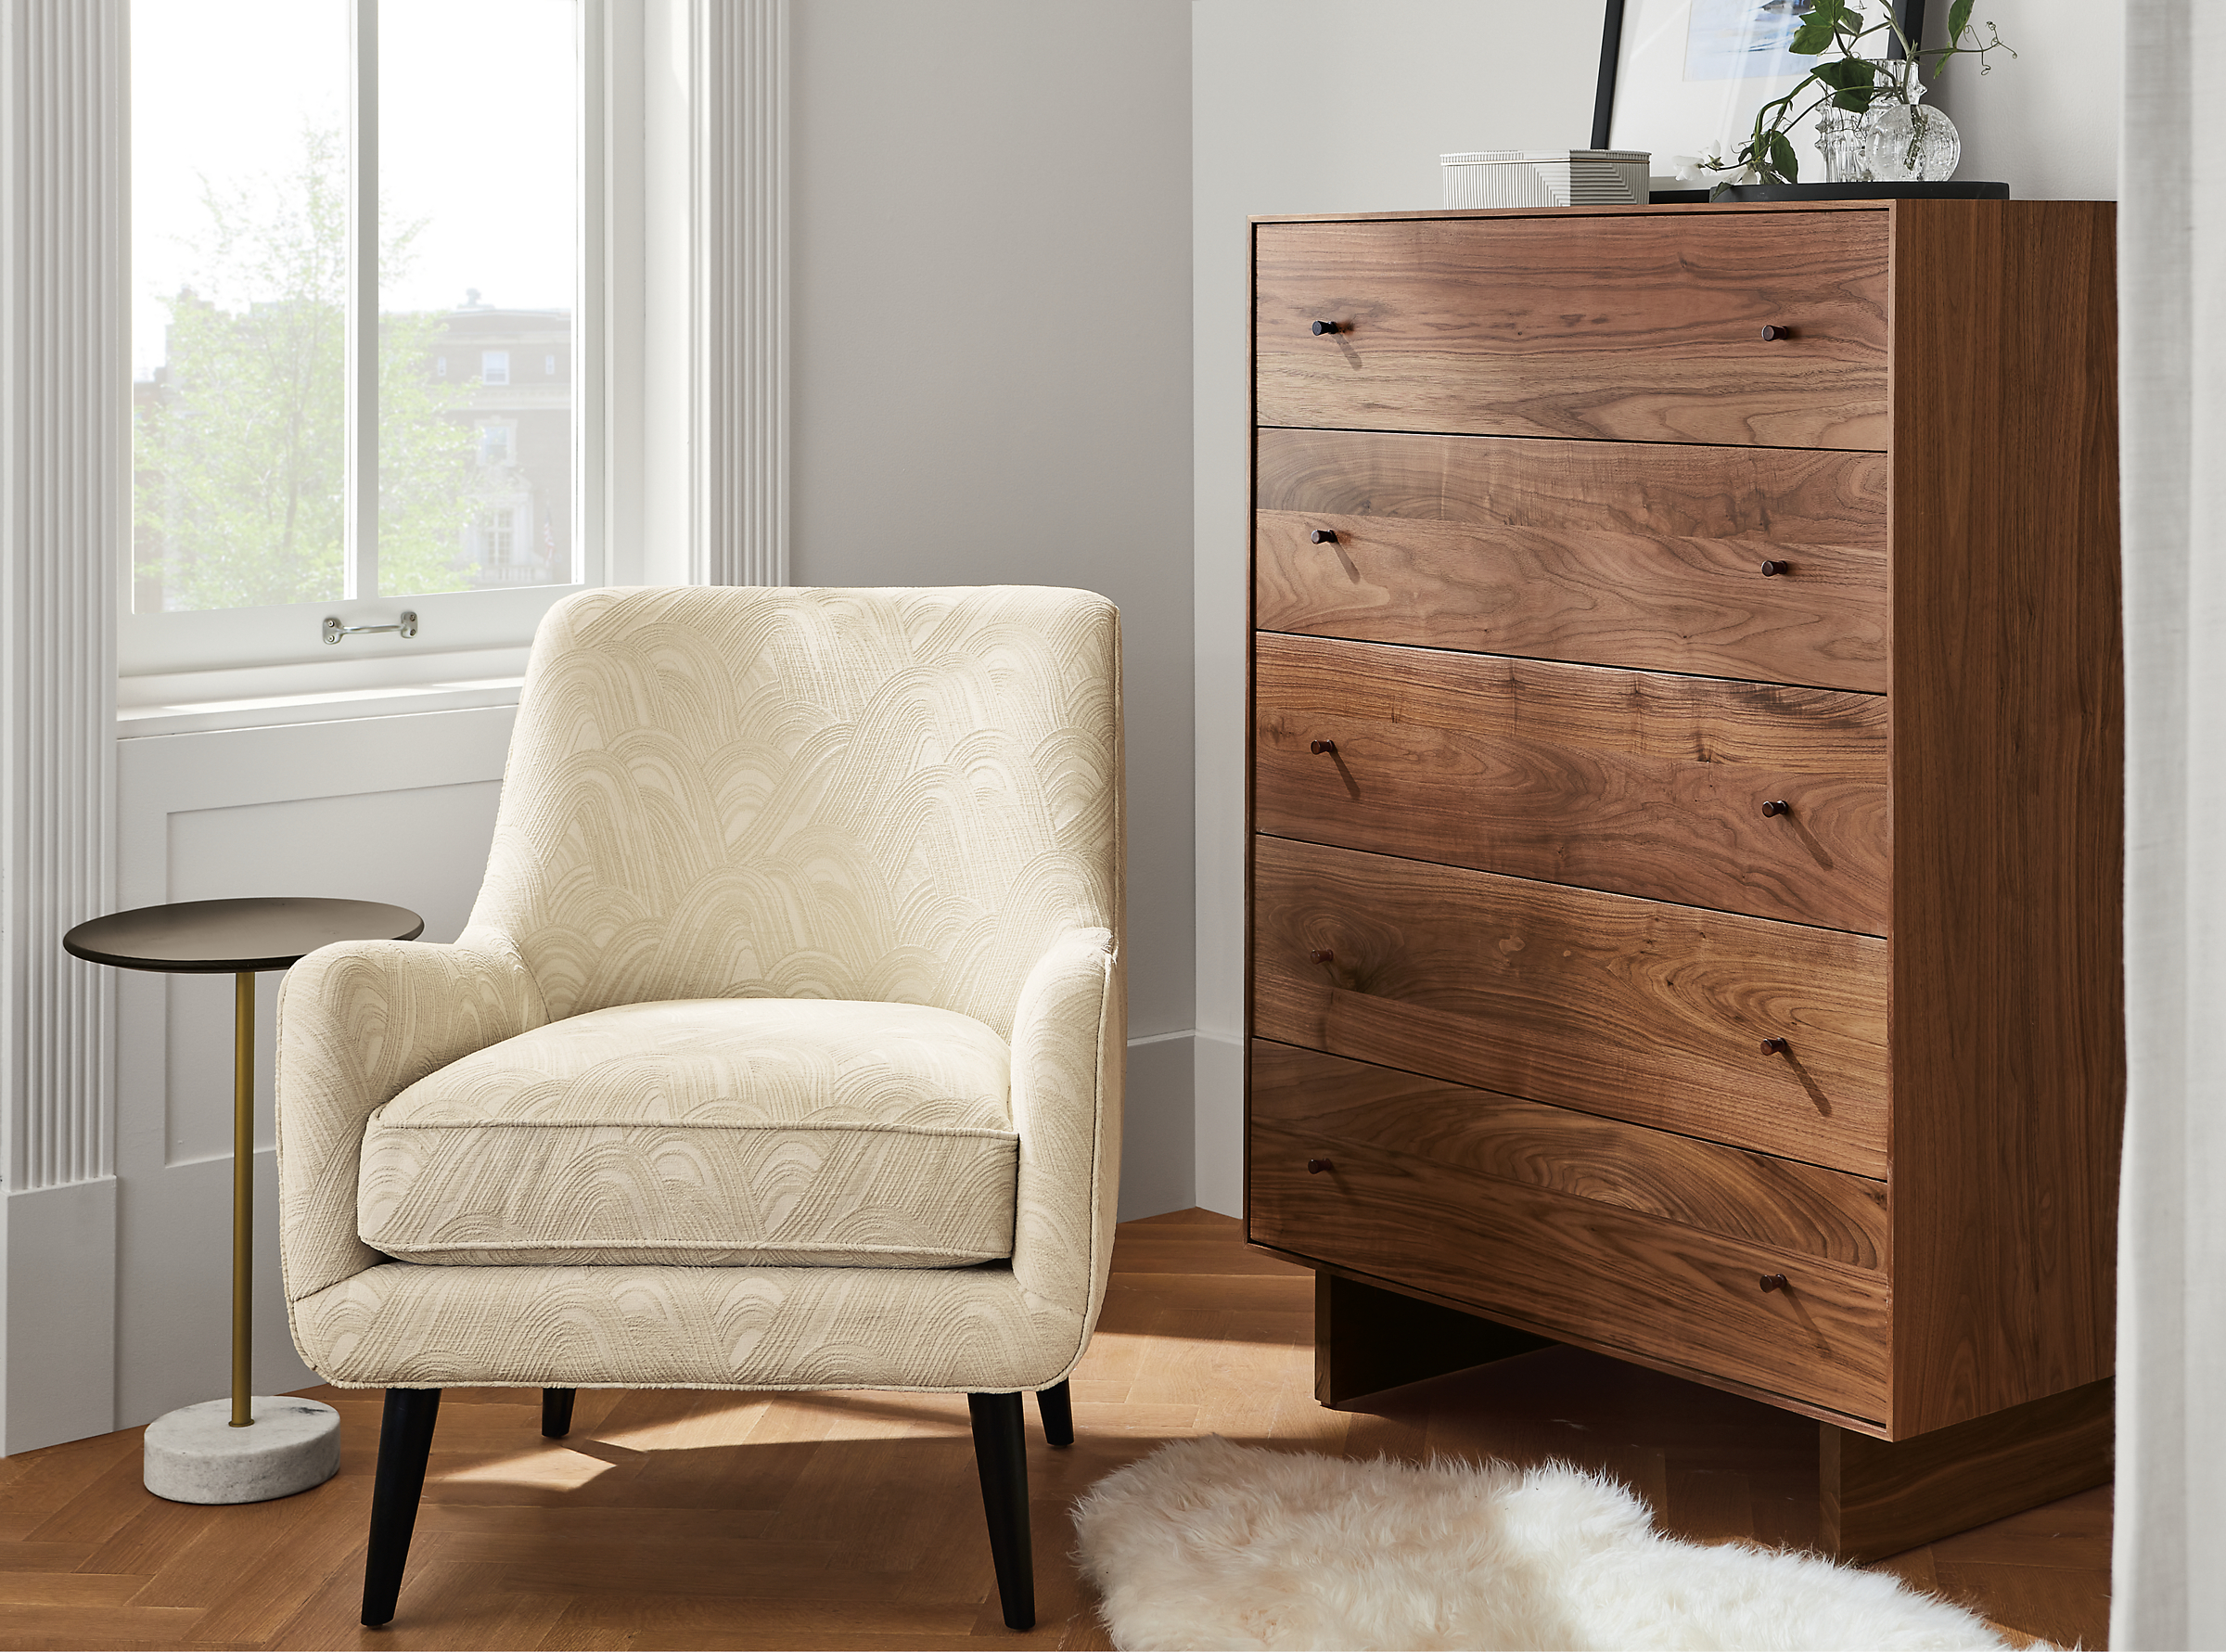 Detail image of quinn chair in Noloni Ivory and Hudson dresser in walnut.